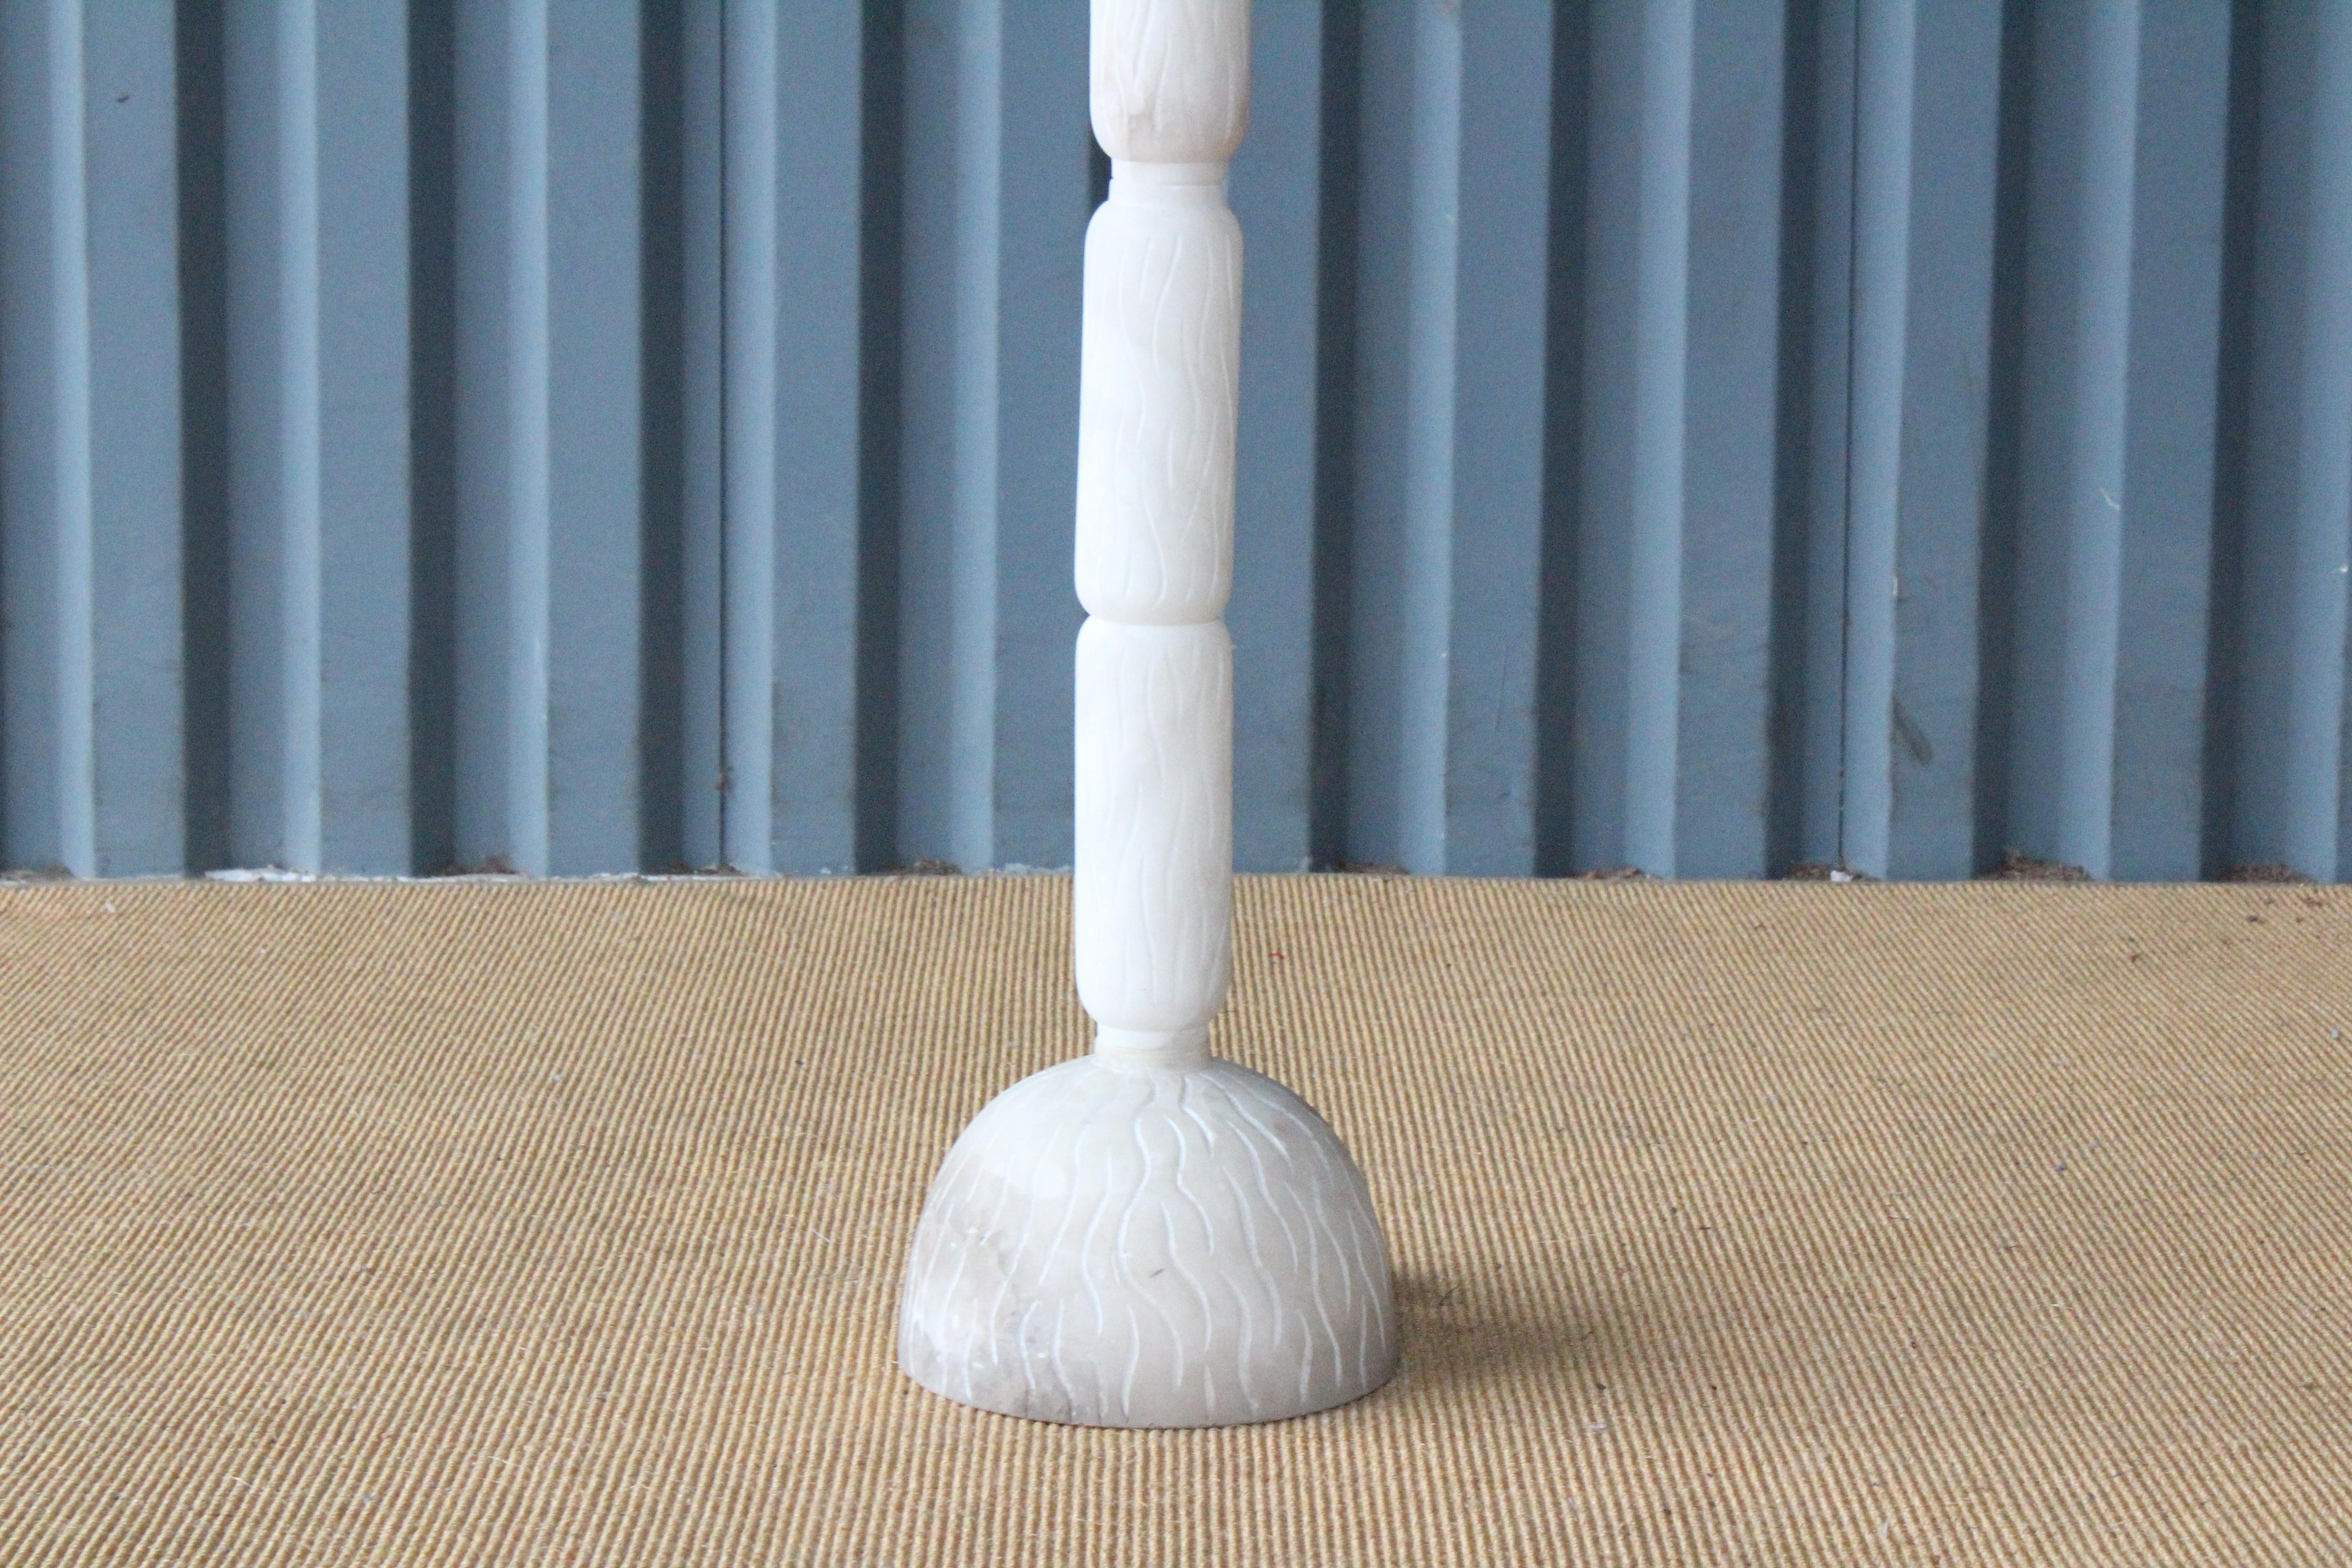 Carved alabaster 1970s Italian floor lamp. Recently rewired and fitted with a custom shade in linen. Note: floor lamp leans slightly.